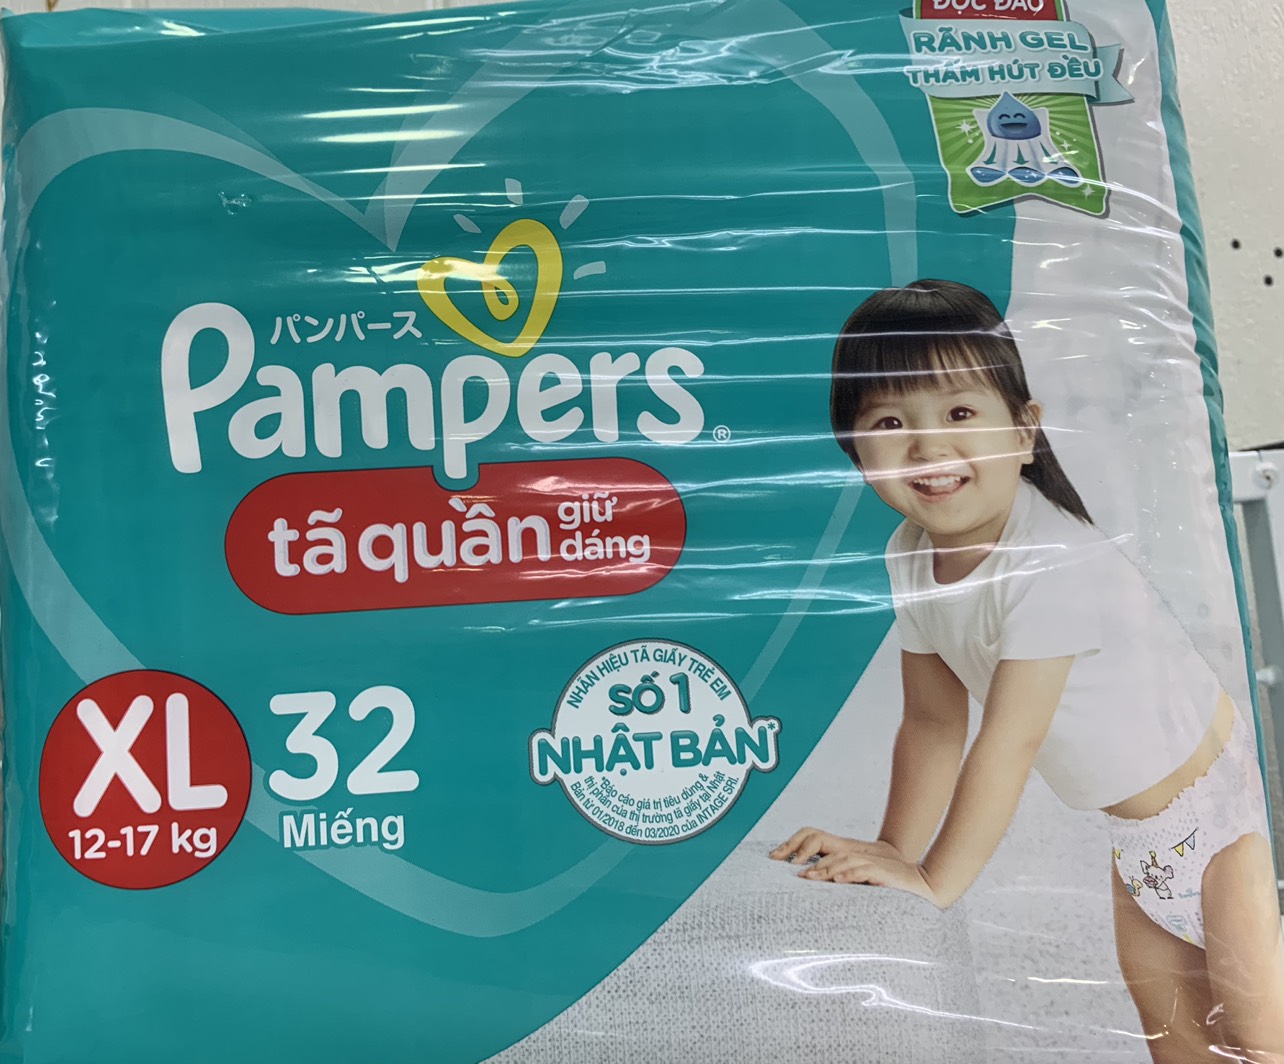 Buy Pampers Premium Care Pants - Large Size Baby Diapers, Softest Ever Pampers  Pants, 9-14 Kg Online at Best Price of Rs 5596 - bigbasket